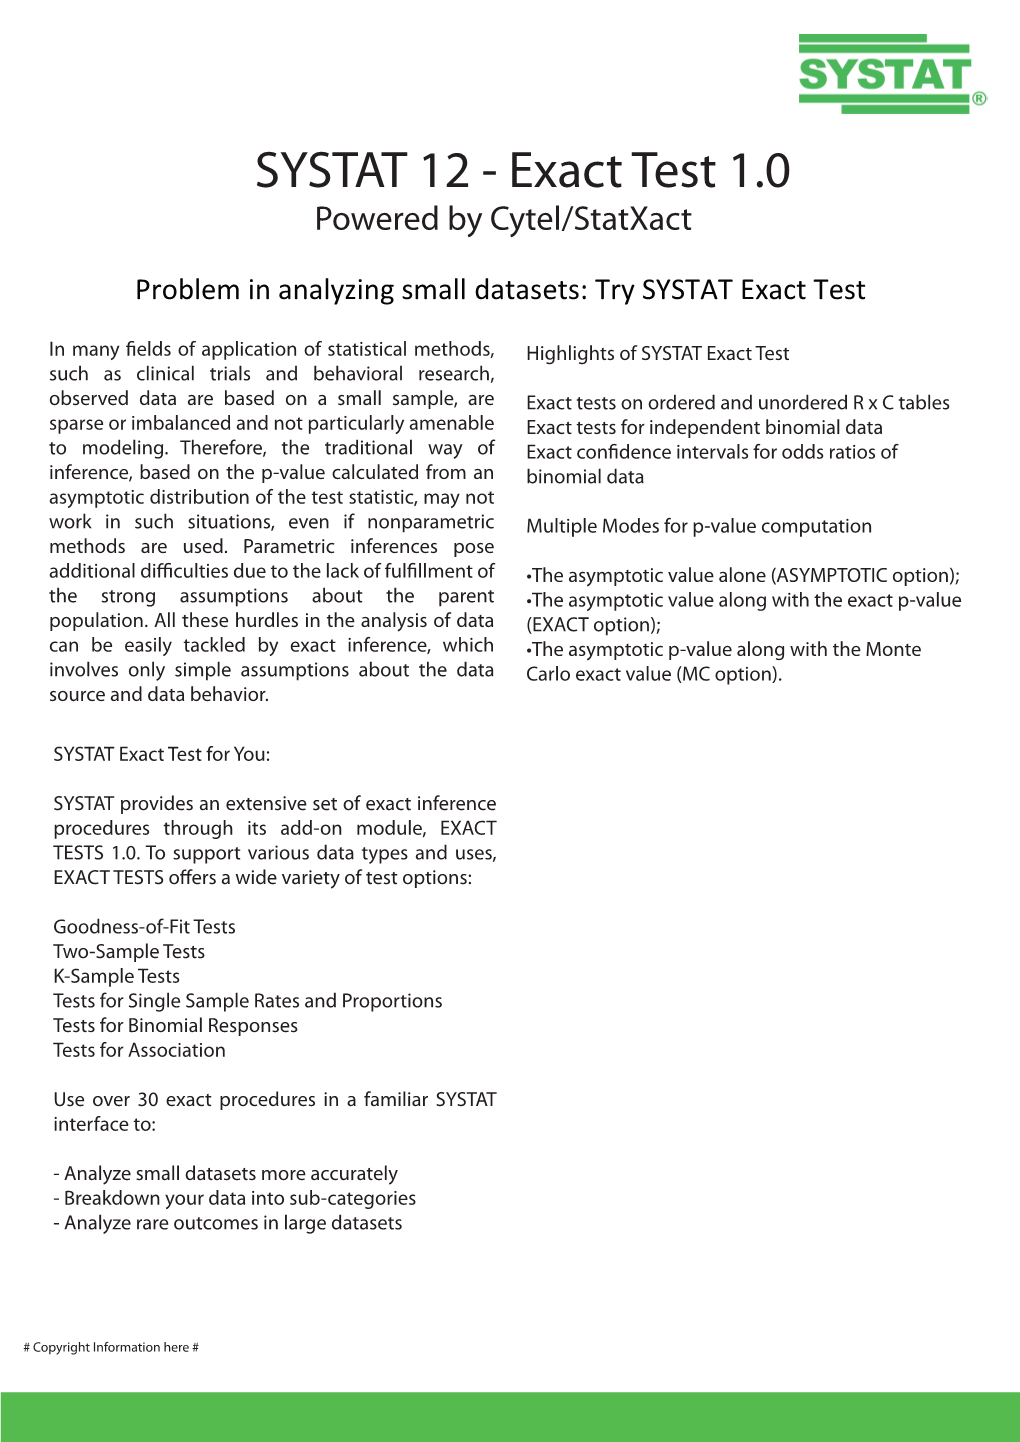 SYSTAT 12 - Exact Test 1.0 Powered by Cytel/Statxact